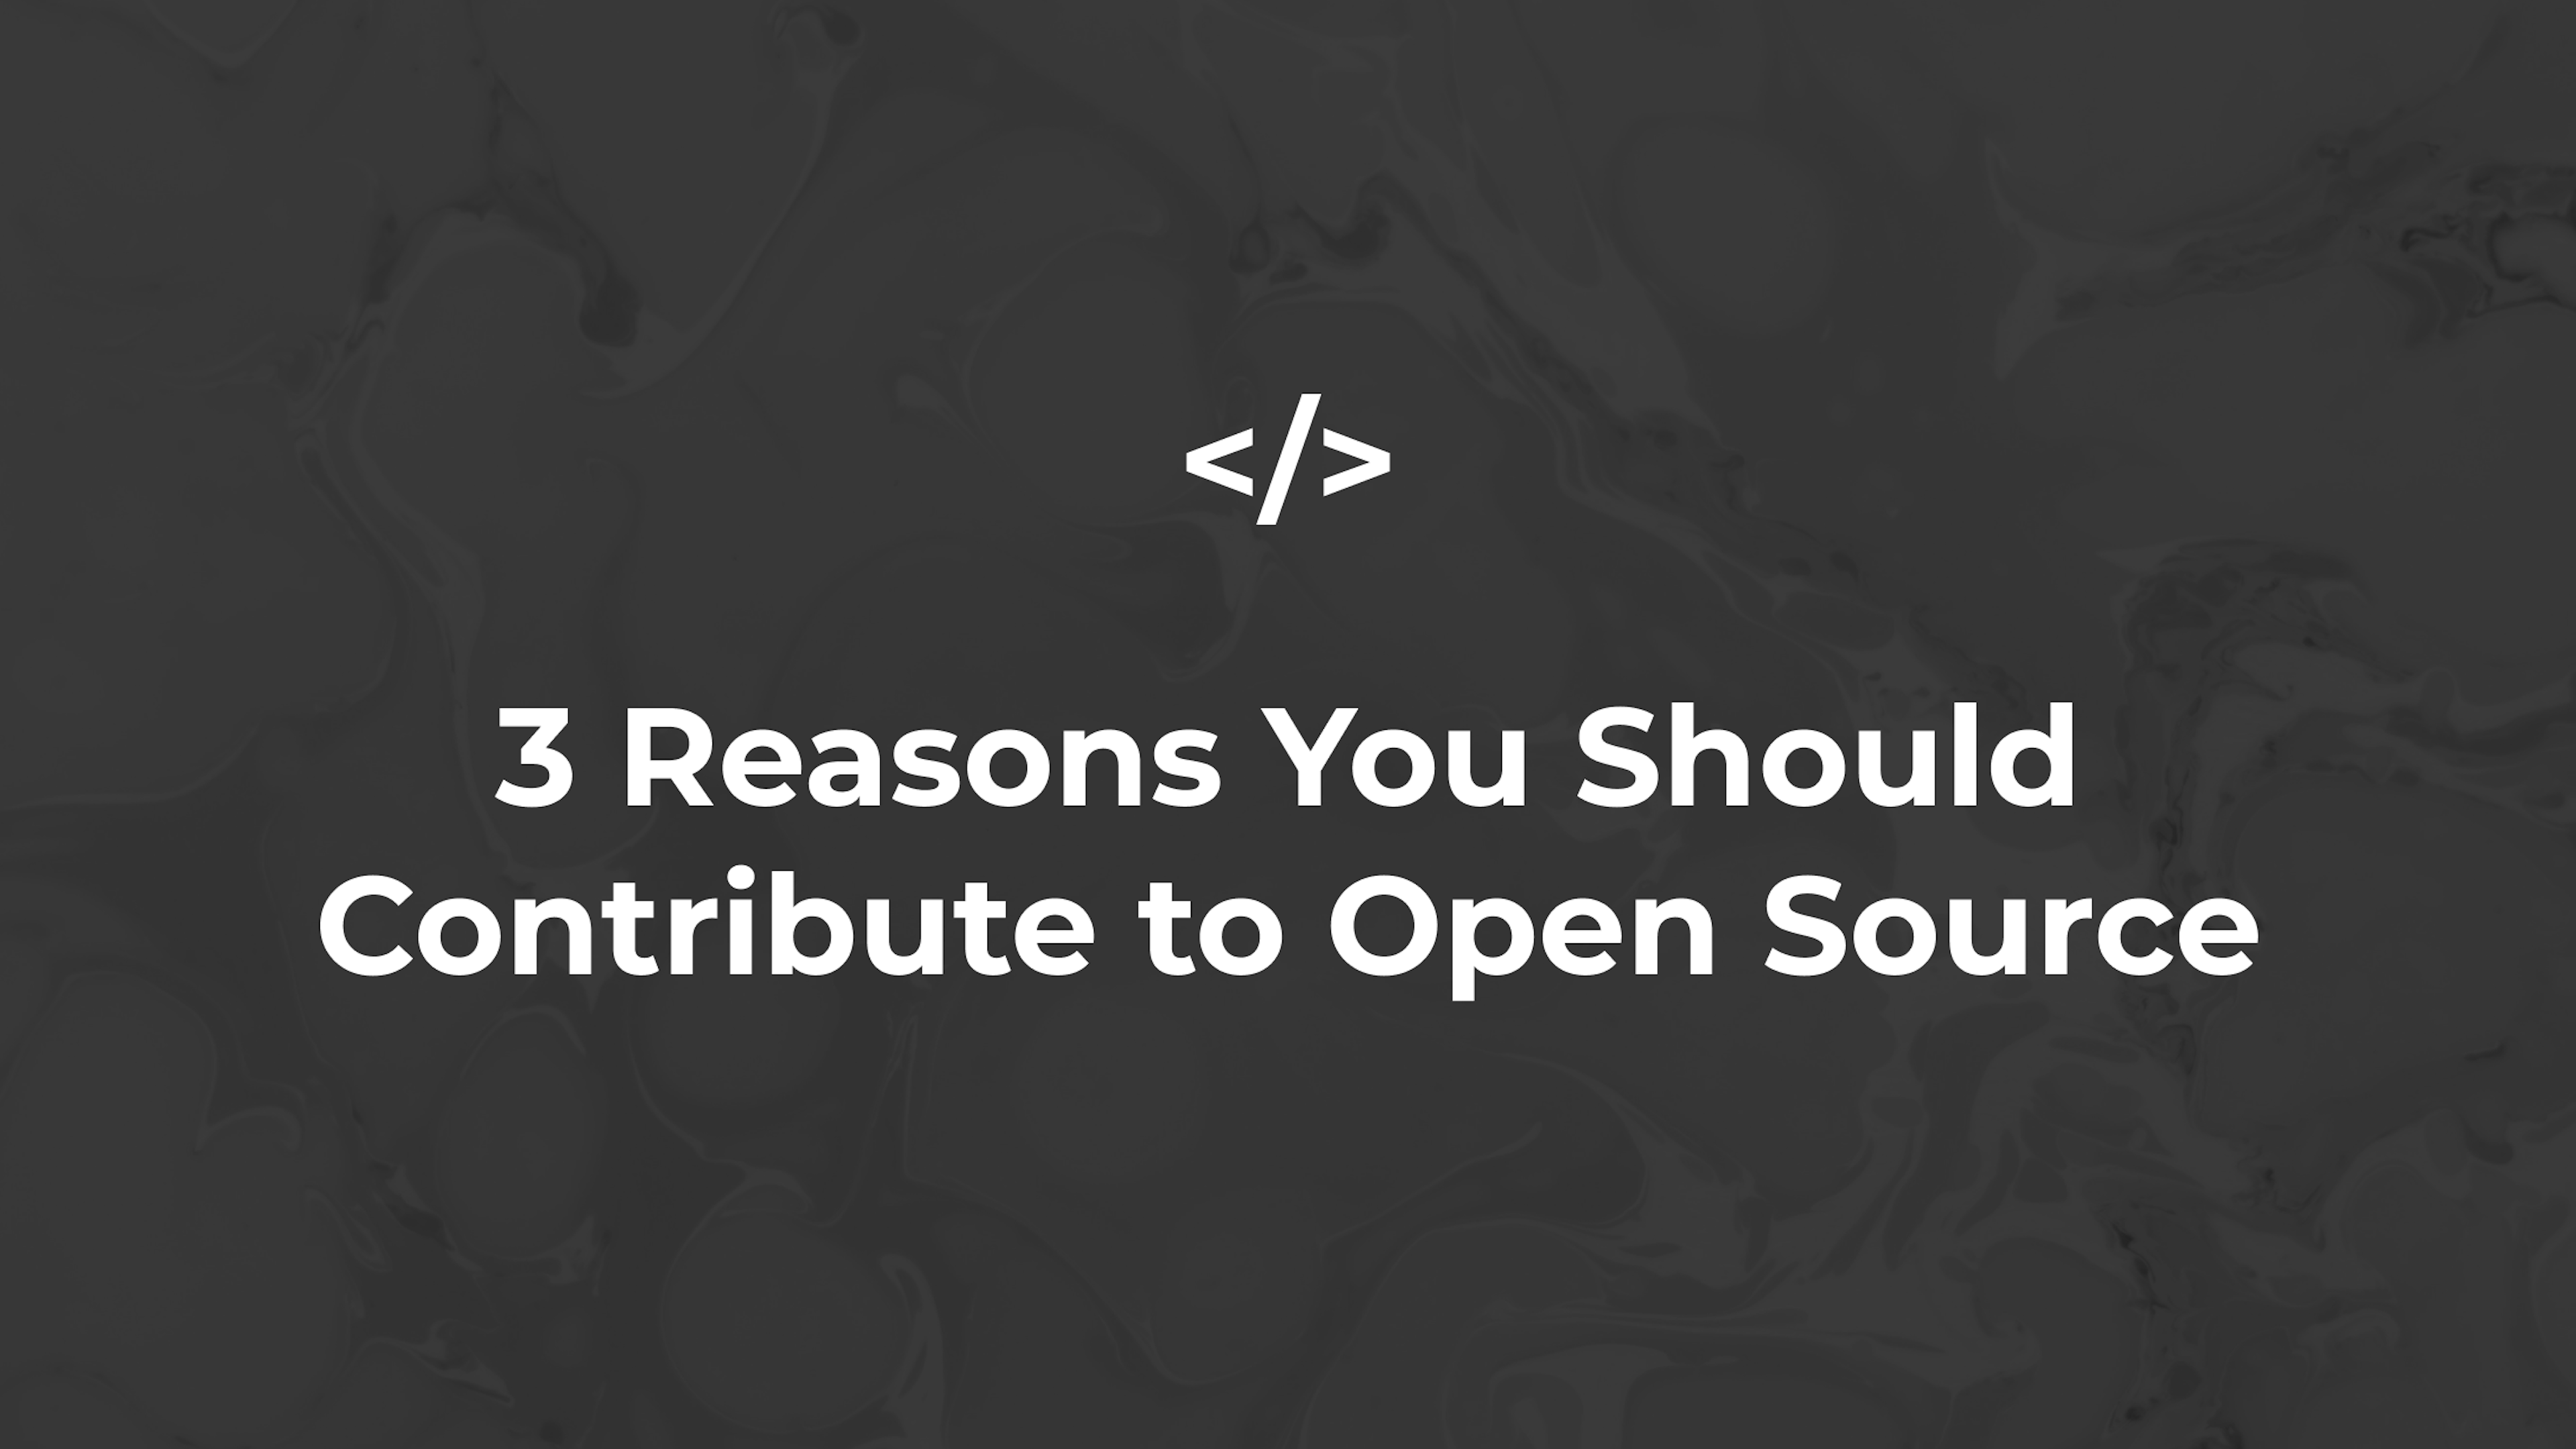 3 Reasons You Should Contribute to Open Source